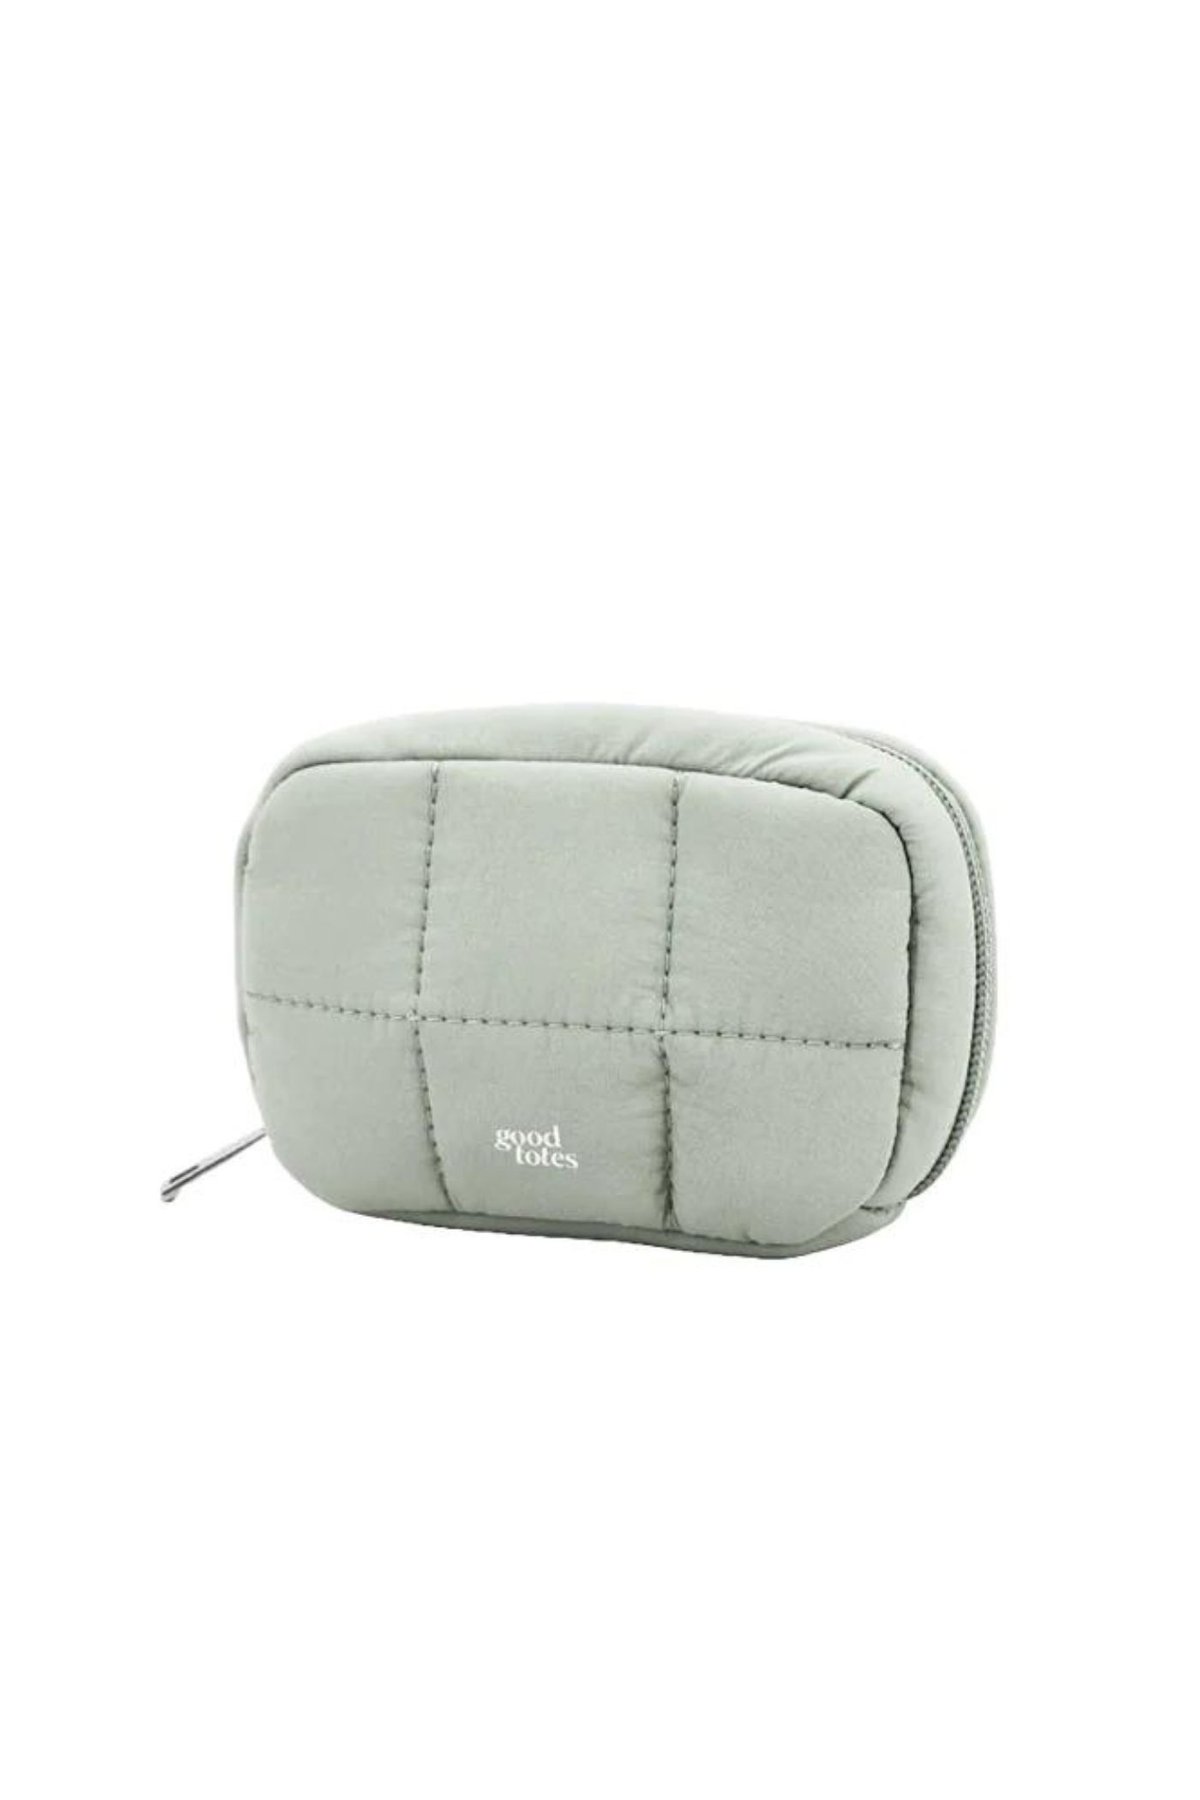 Good Totes (Small Bread Puffer Pouch - Sage)